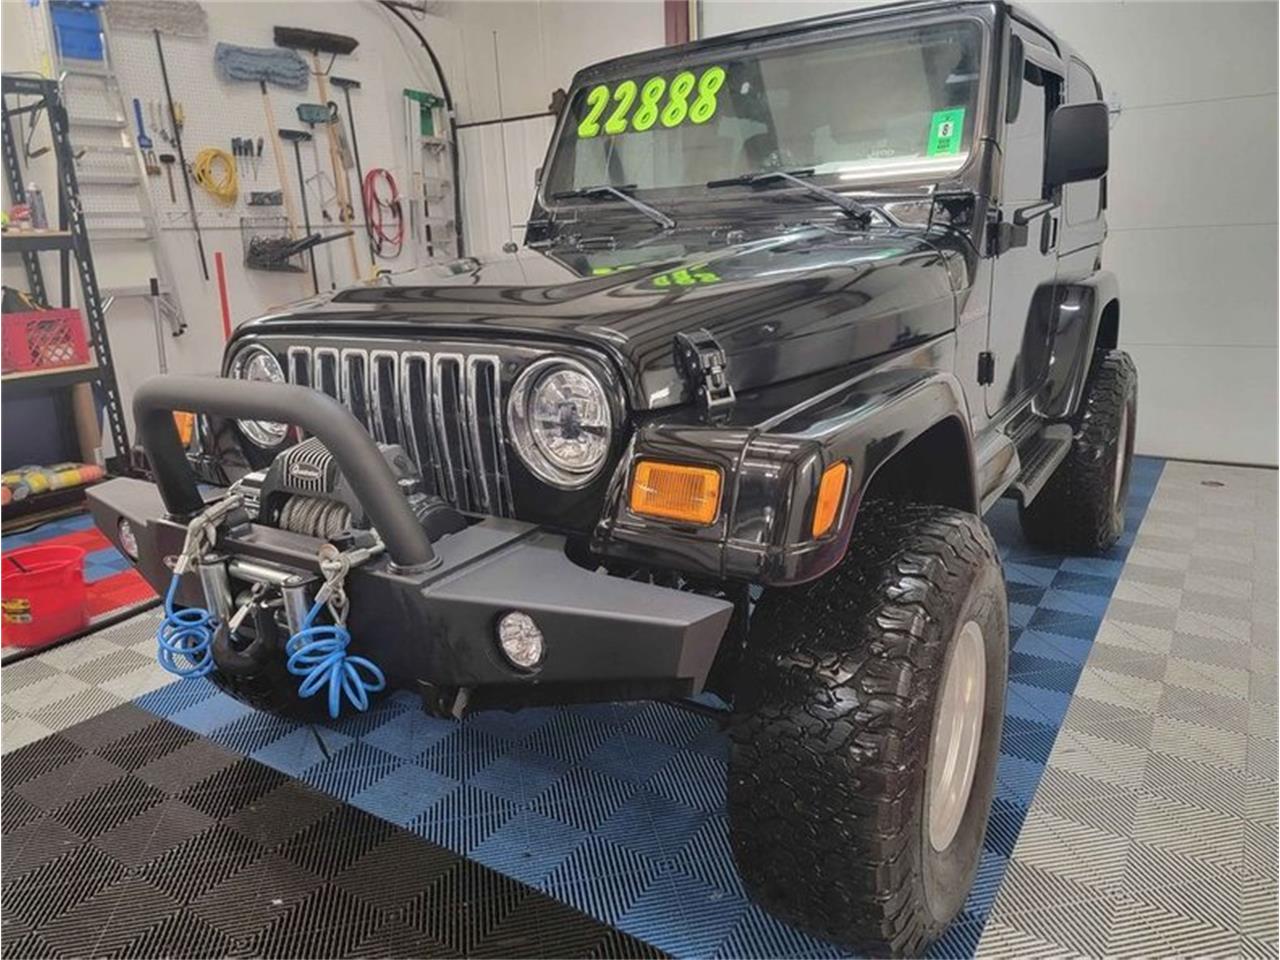 For Sale at Auction: 1998 Jeep Wrangler in Greensboro, North Carolina for sale in Greensboro, NC